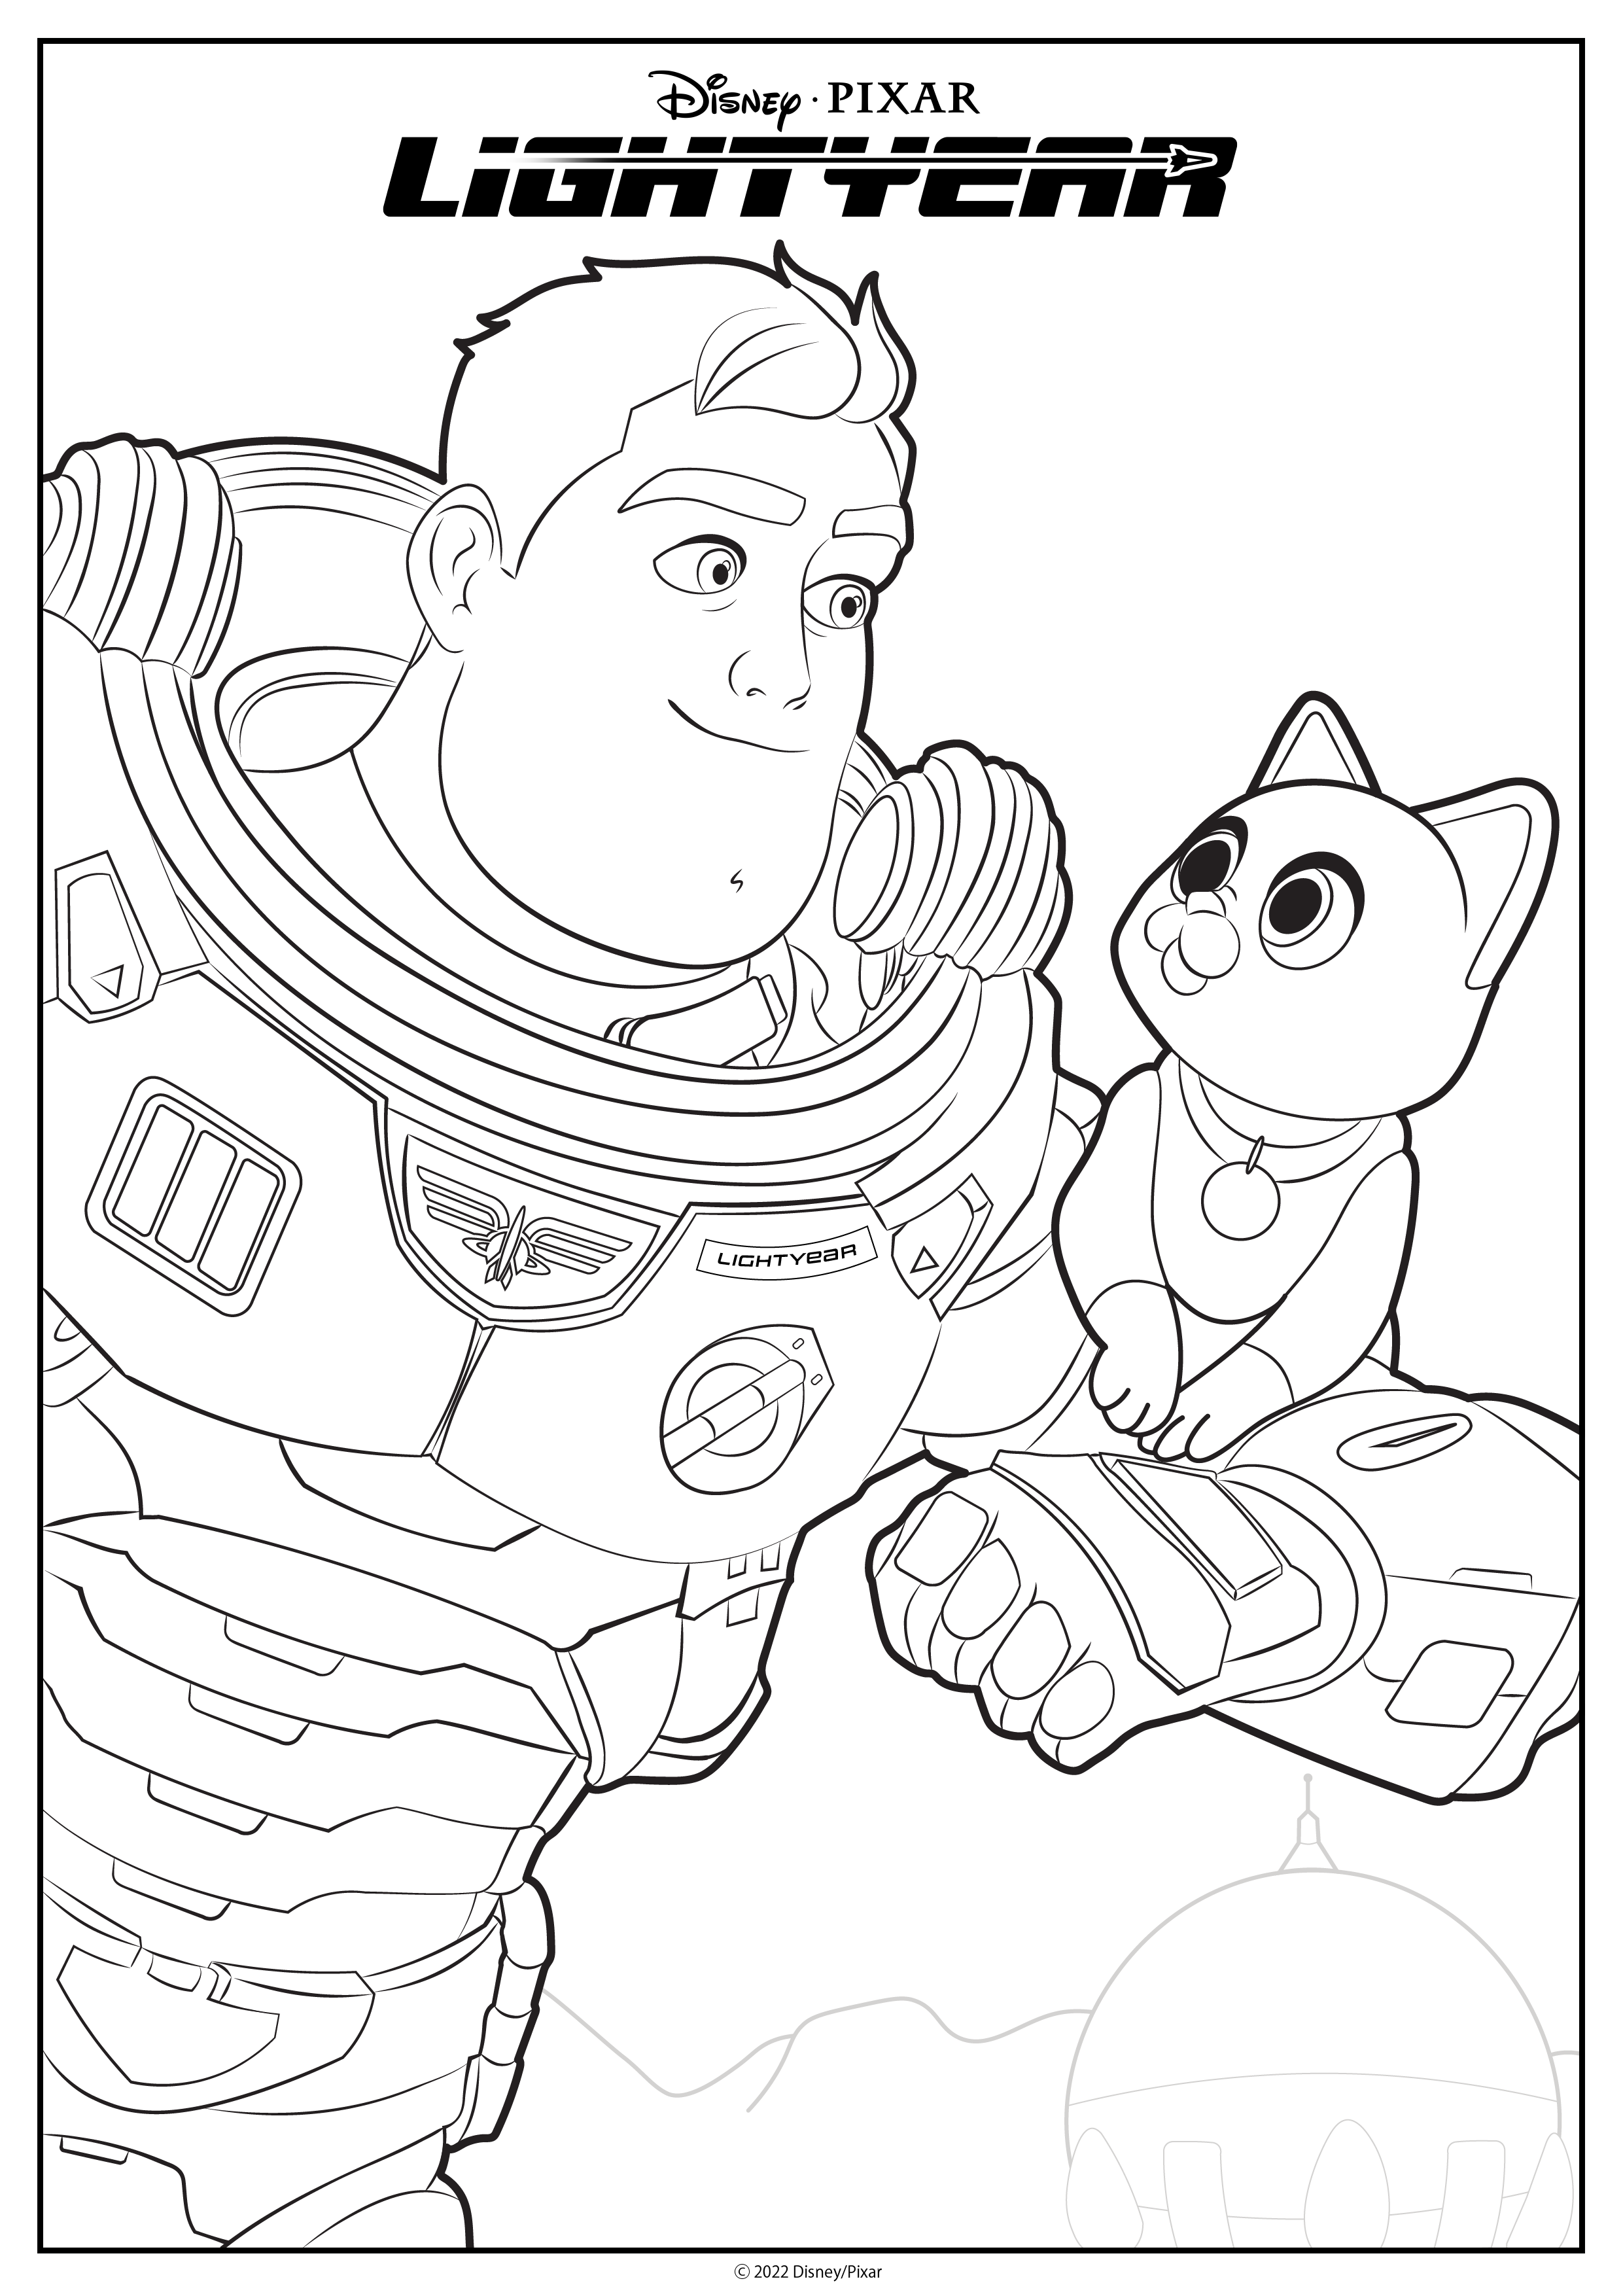 Free Printable LIGHTYEAR Coloring Pages   Lola Lambchops